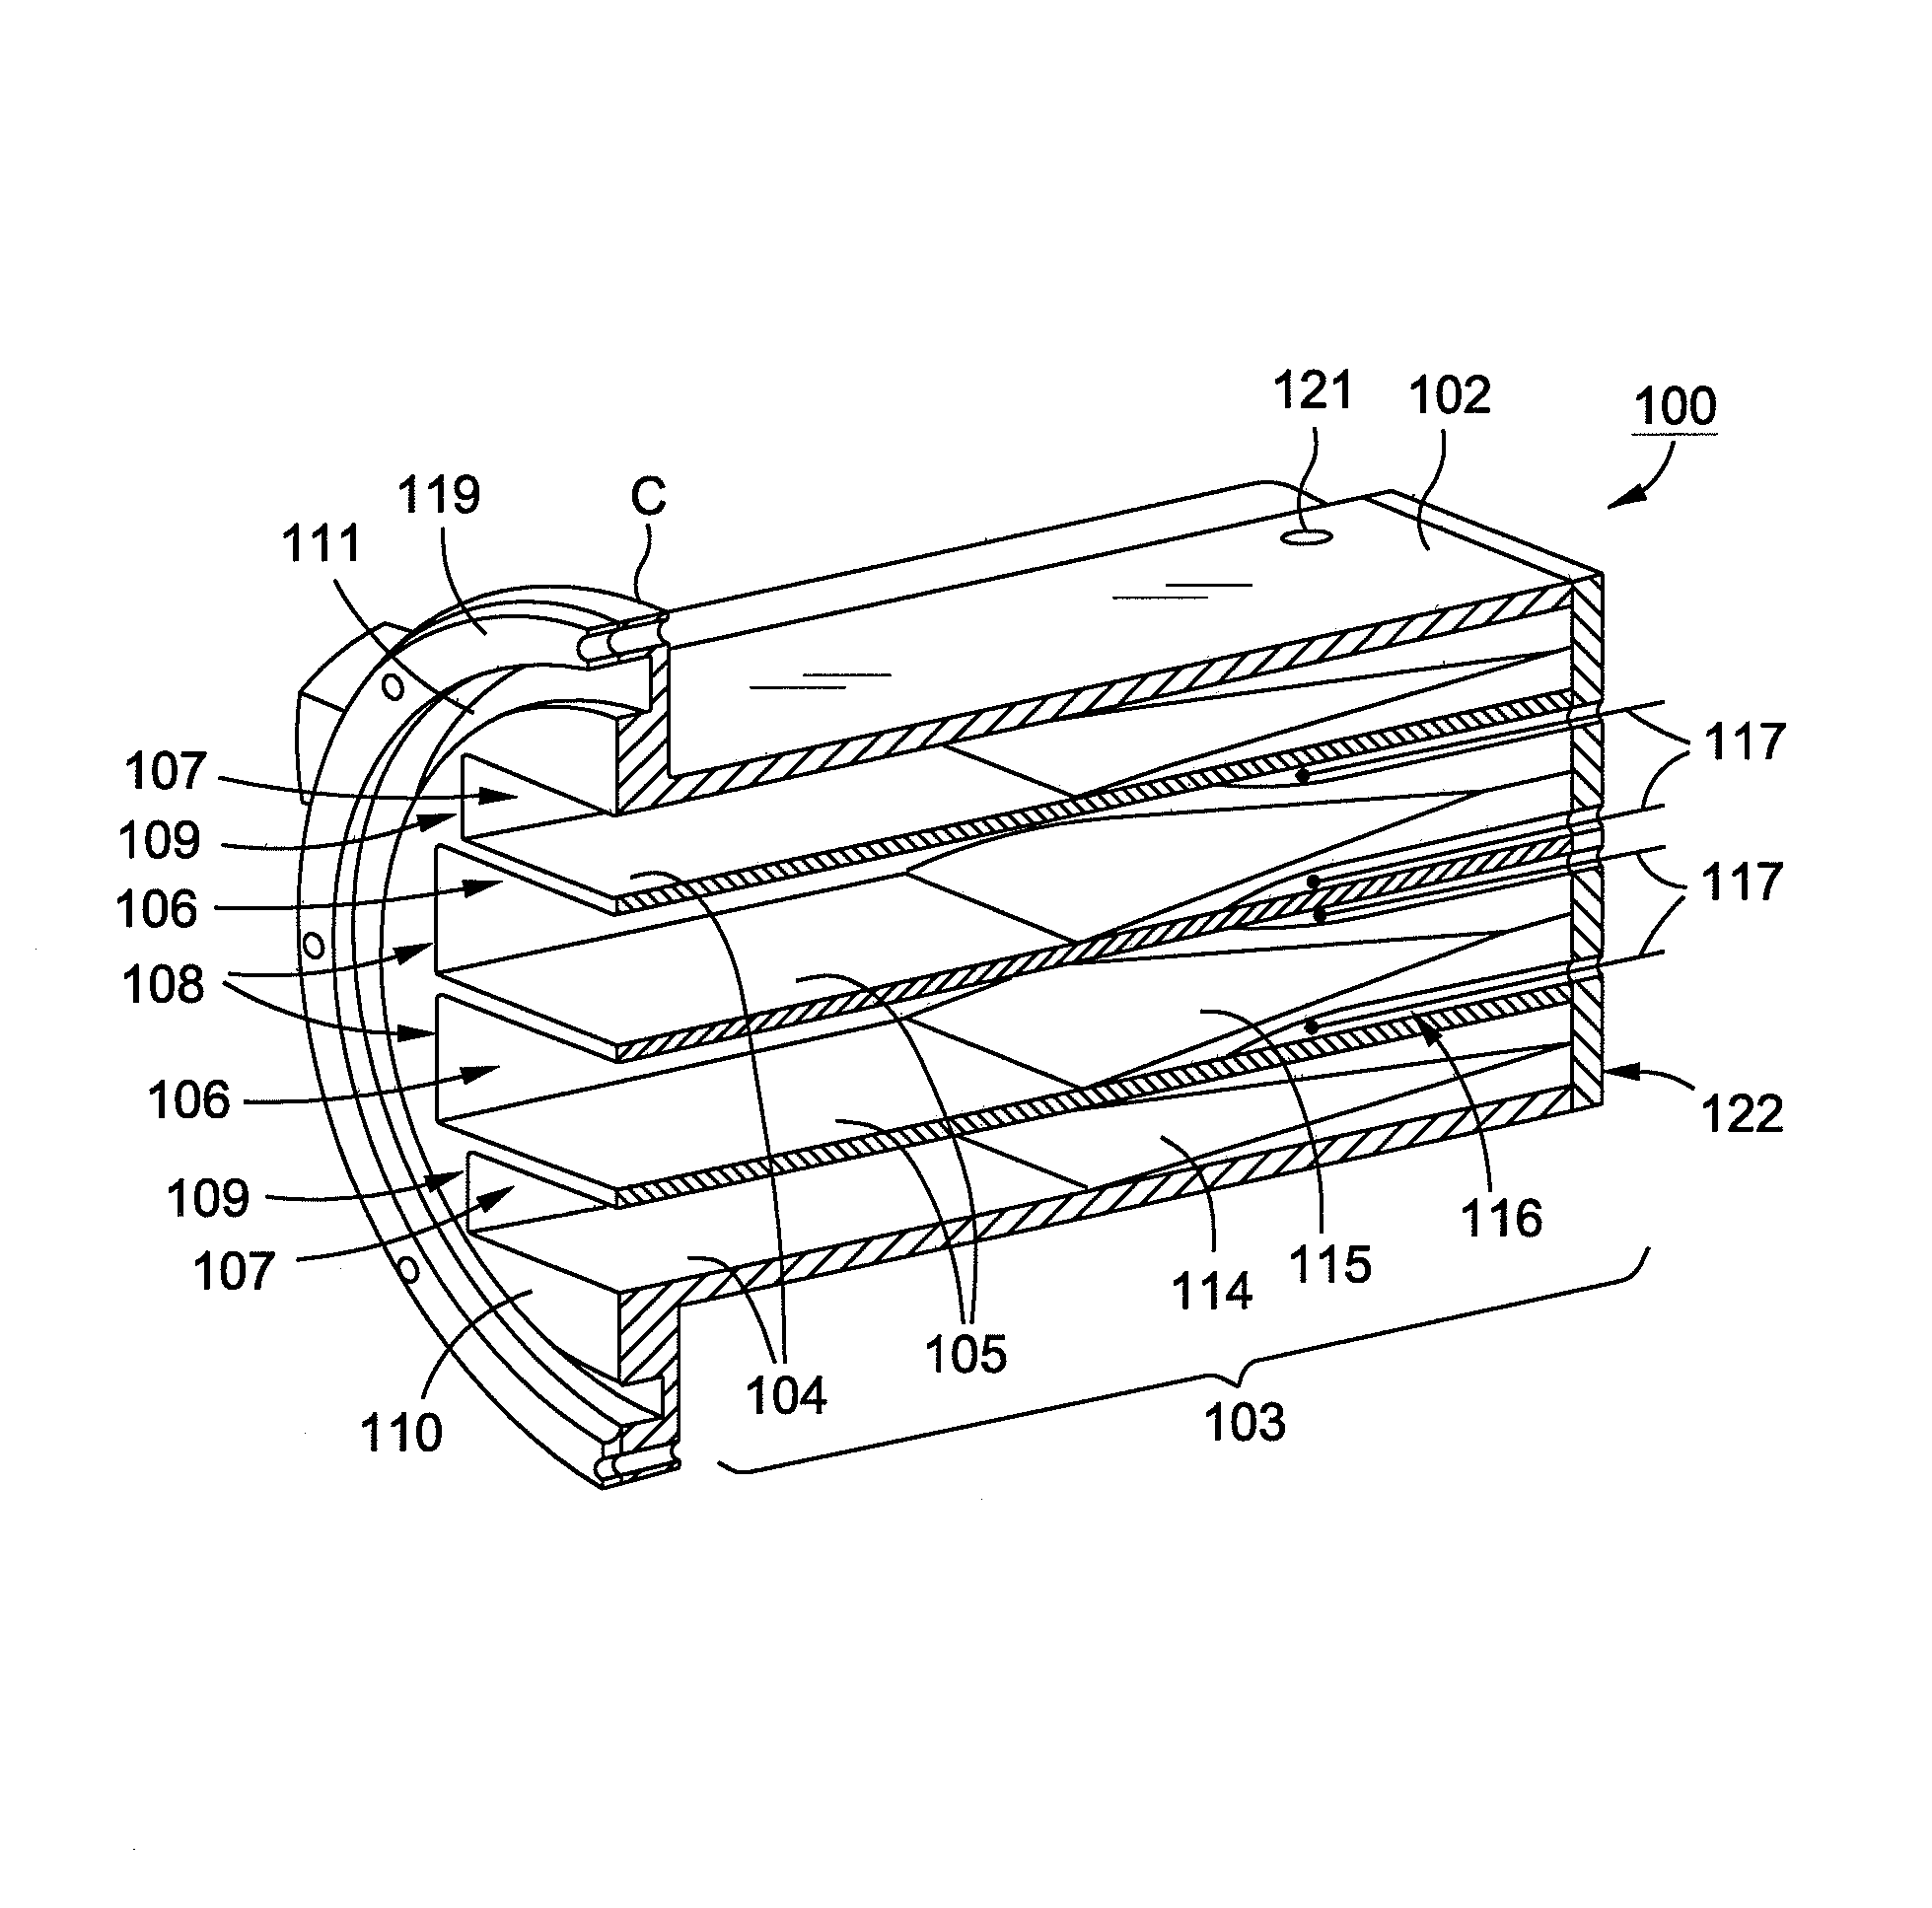 Generic pick-up horn for high power thermal vacuum testing of satellite payloads at multiple frequency bands and at multiple polarizations